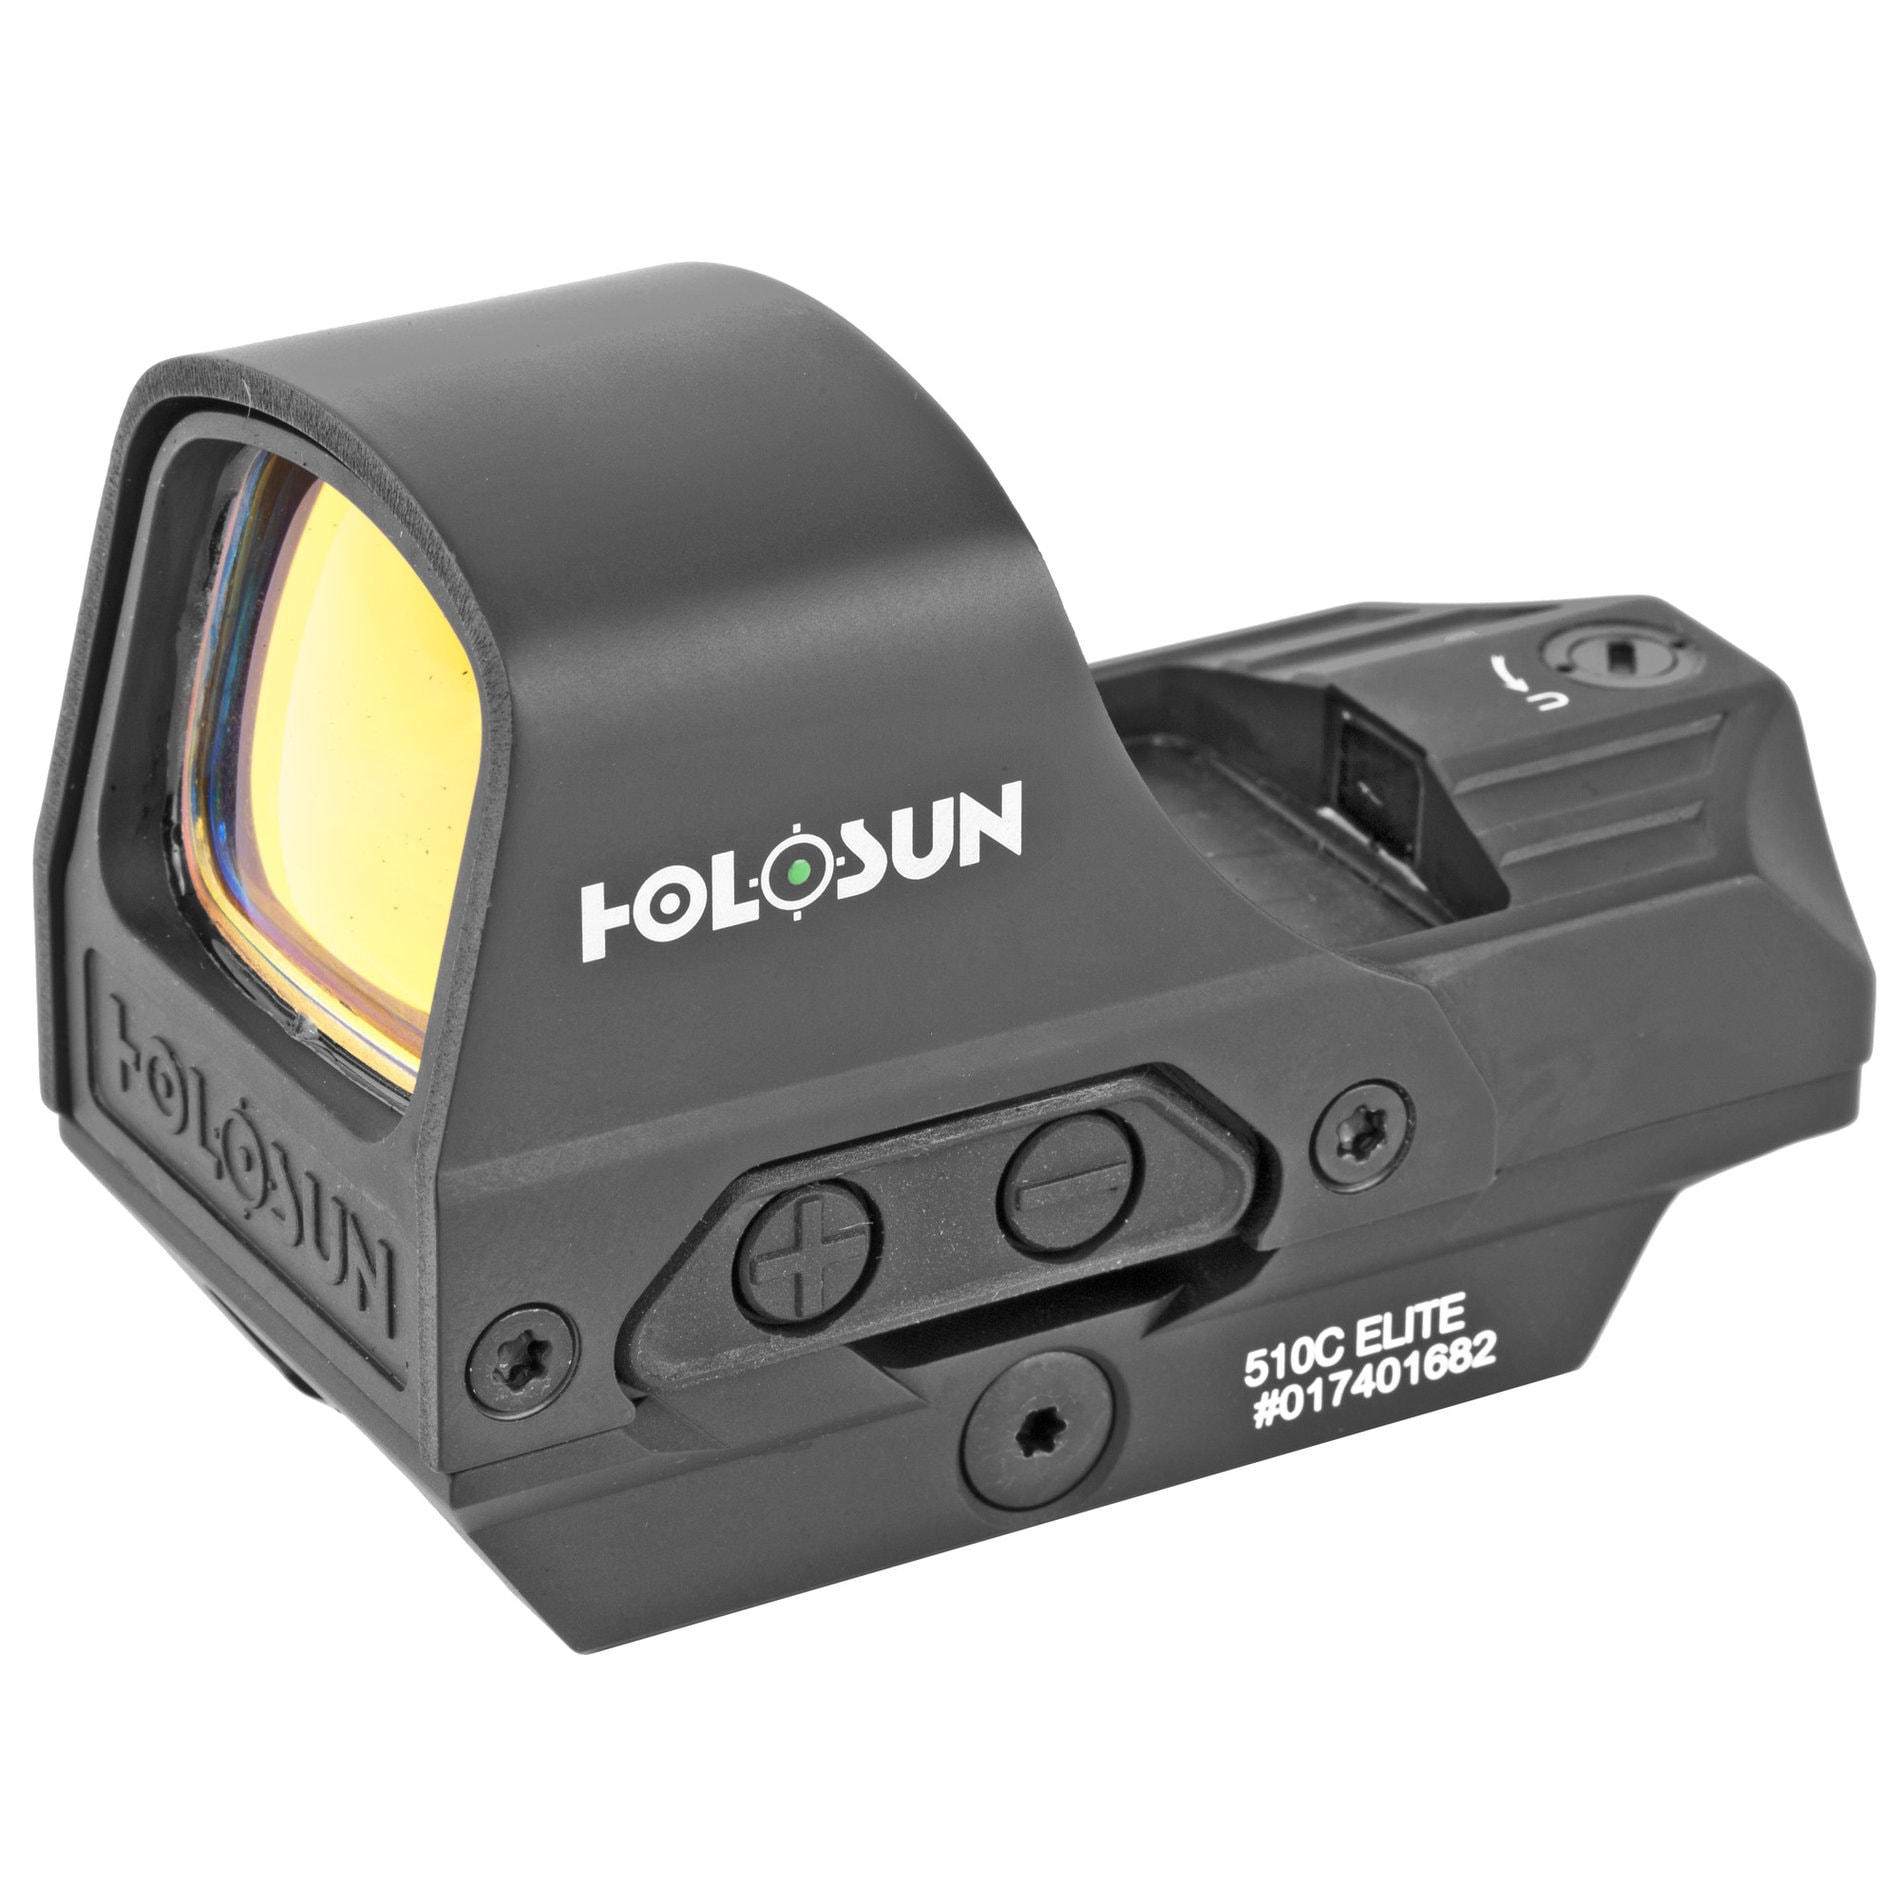 Holosun 510C Open Reflex Sight with Solar Backup for Rifles - AT3 Tactical